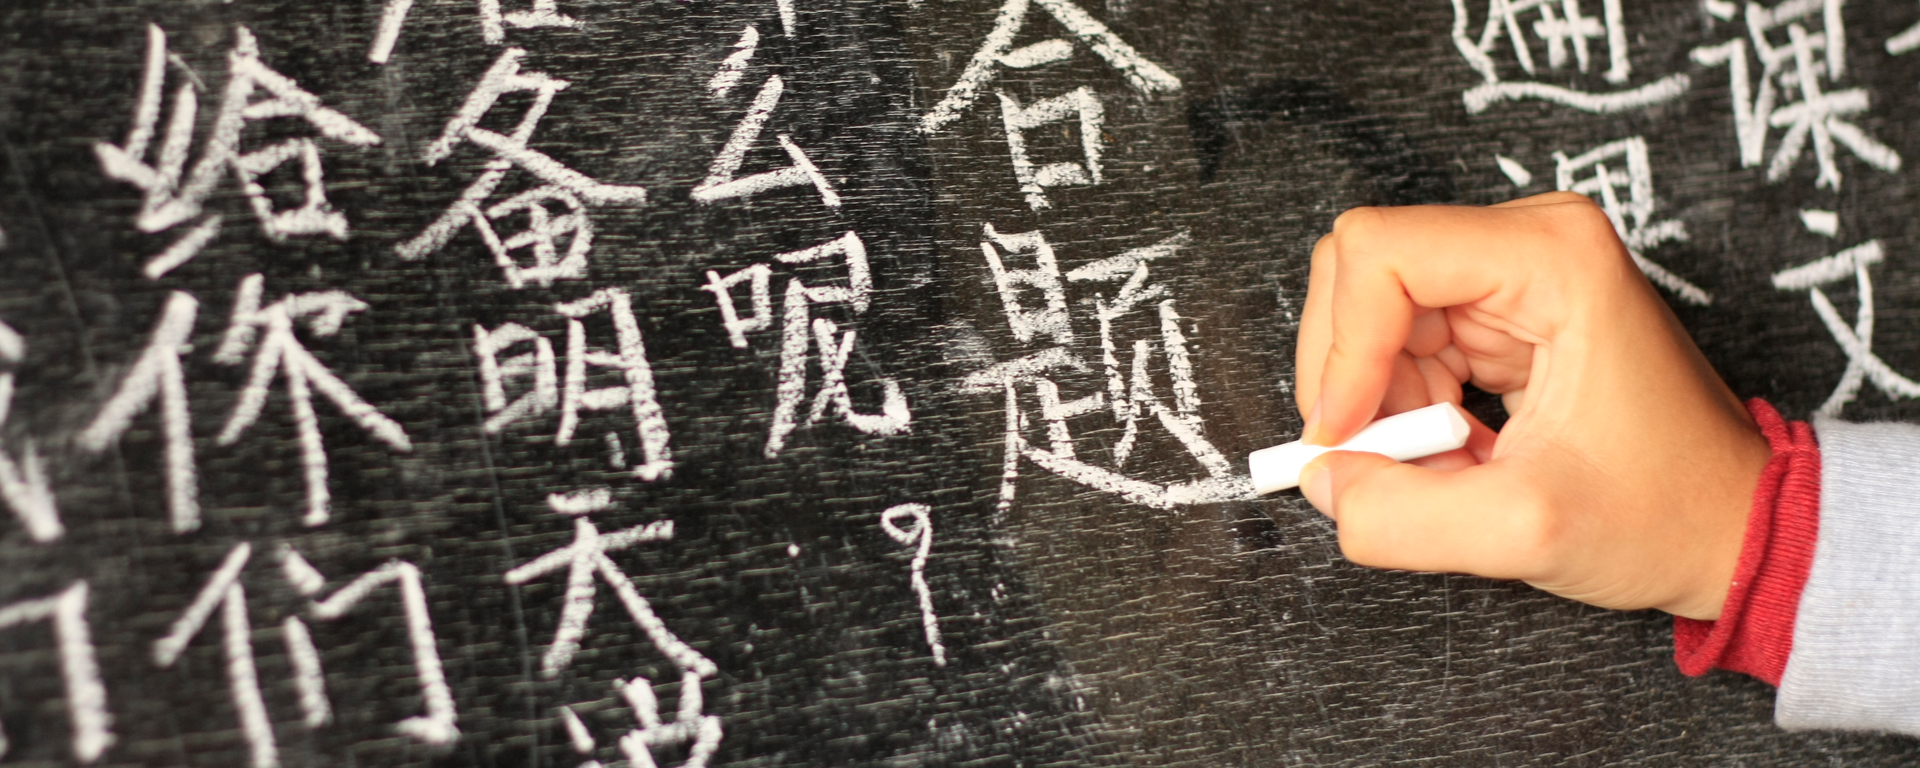 Girl writing Chinese characters on a blackboard at a remote school in Northern Thailand. - stock photo